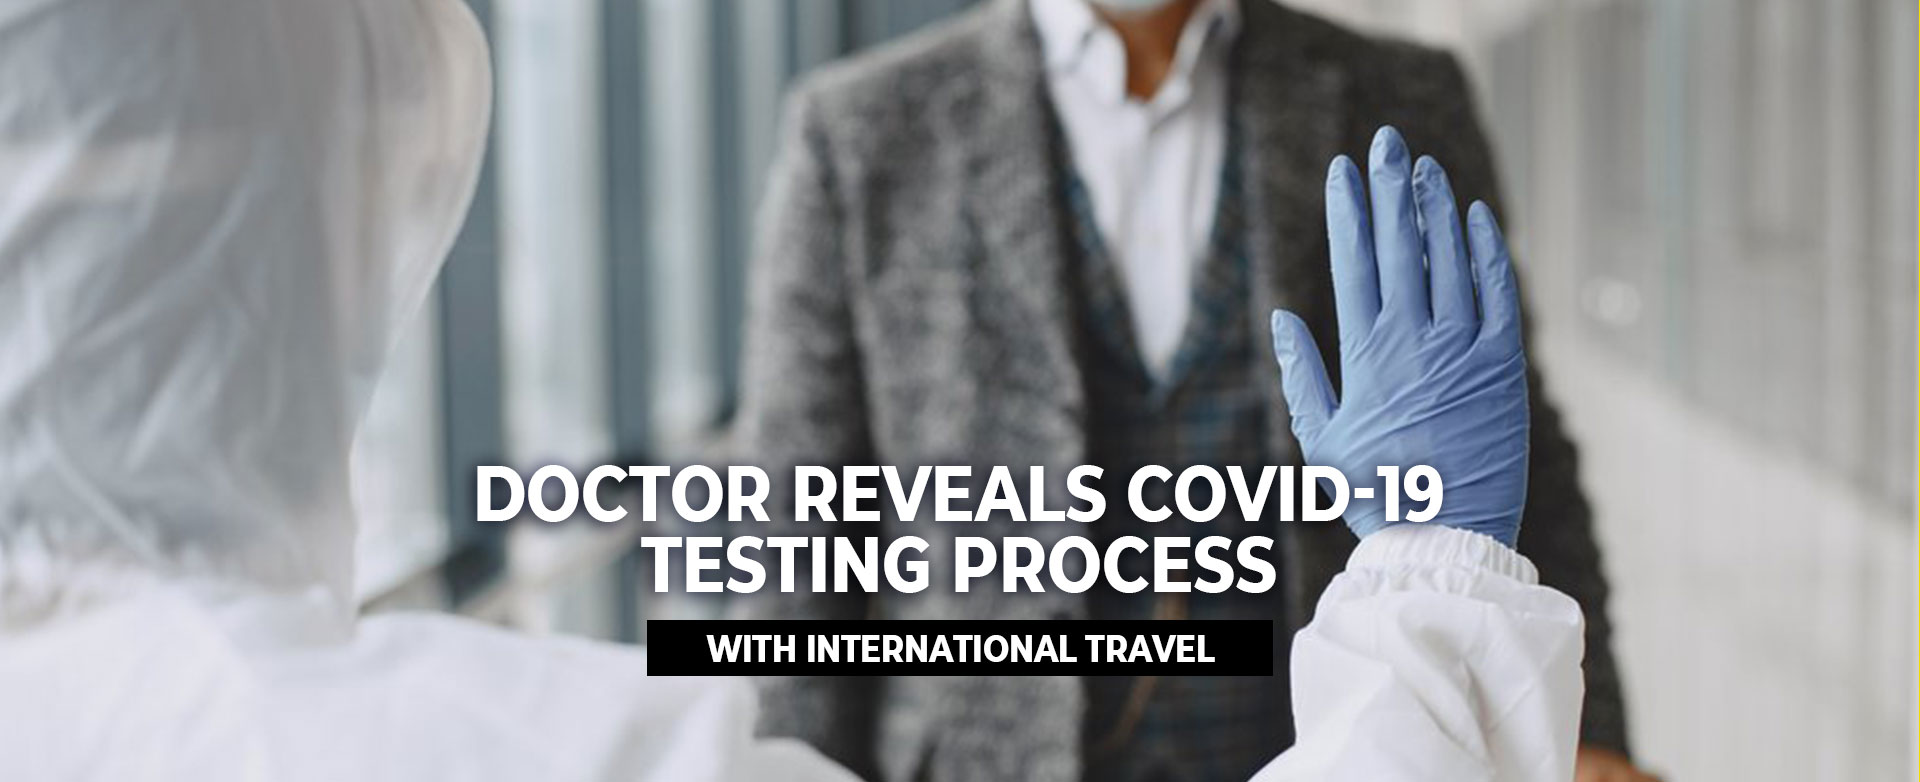 MyPatriotsNetwork-Doctor Reveals Covid-19 Testing Process With International Travel